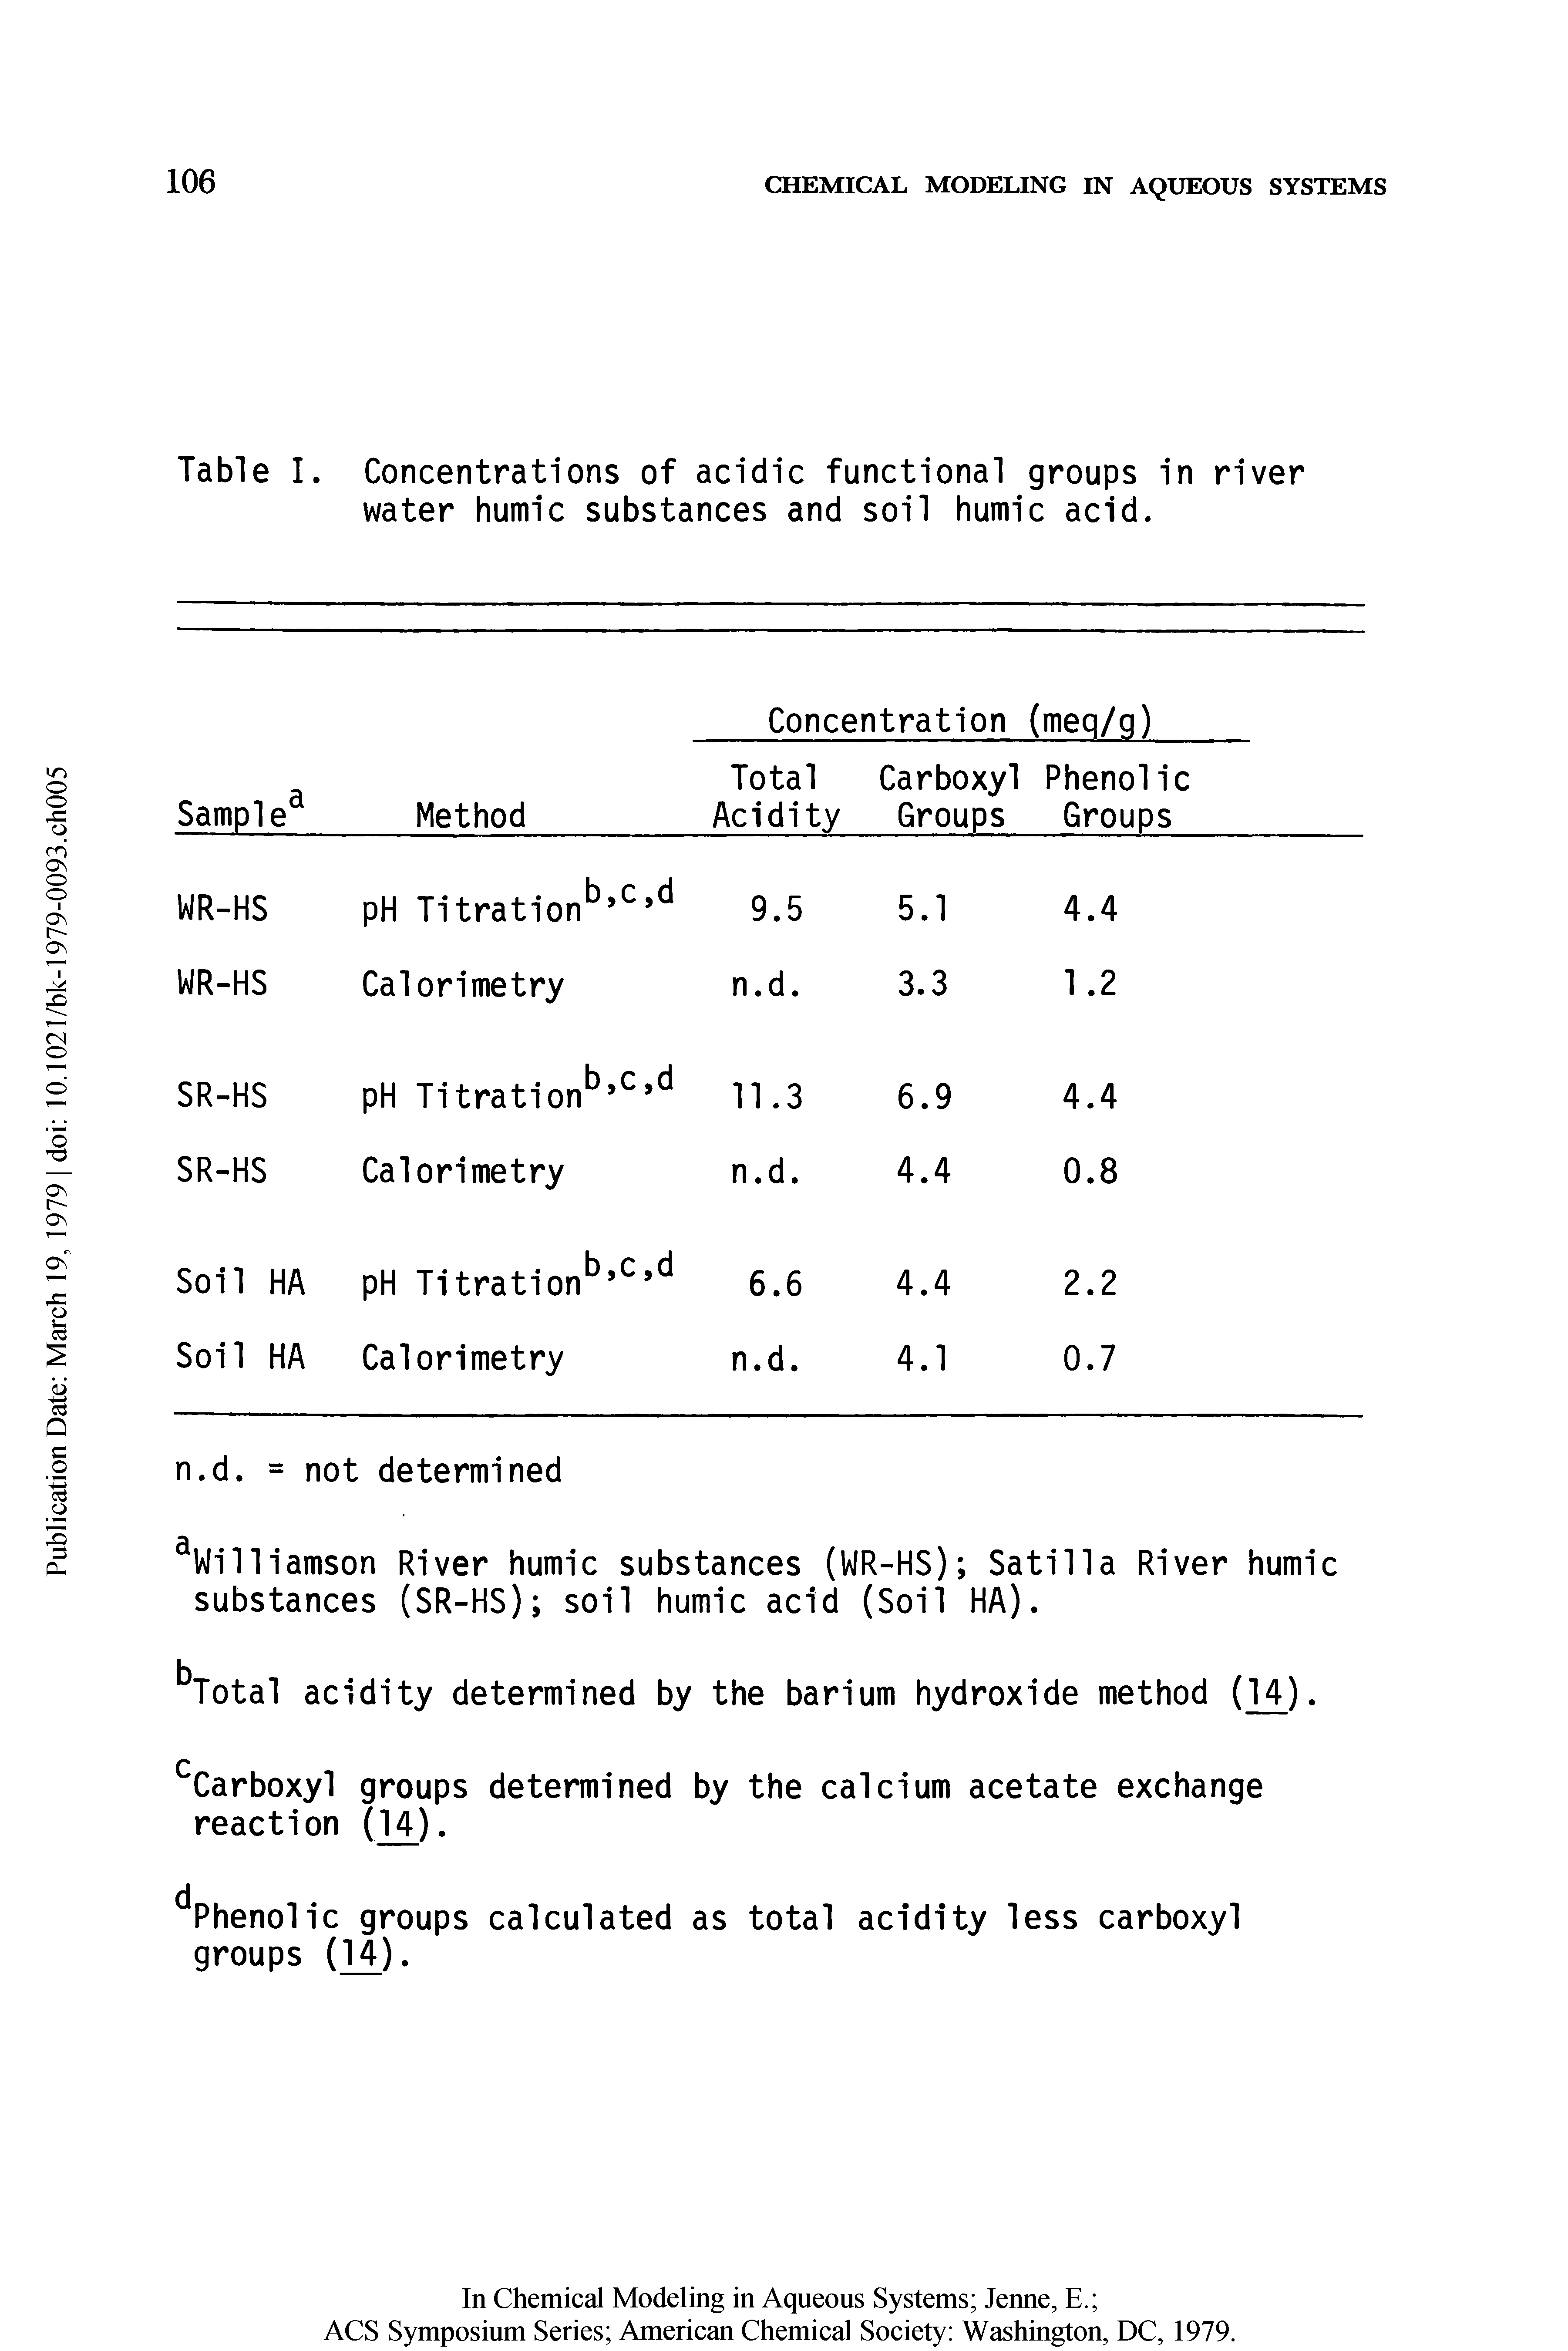 Table I. Concentrations of acidic functional groups in river water humic substances and soil humic acid.